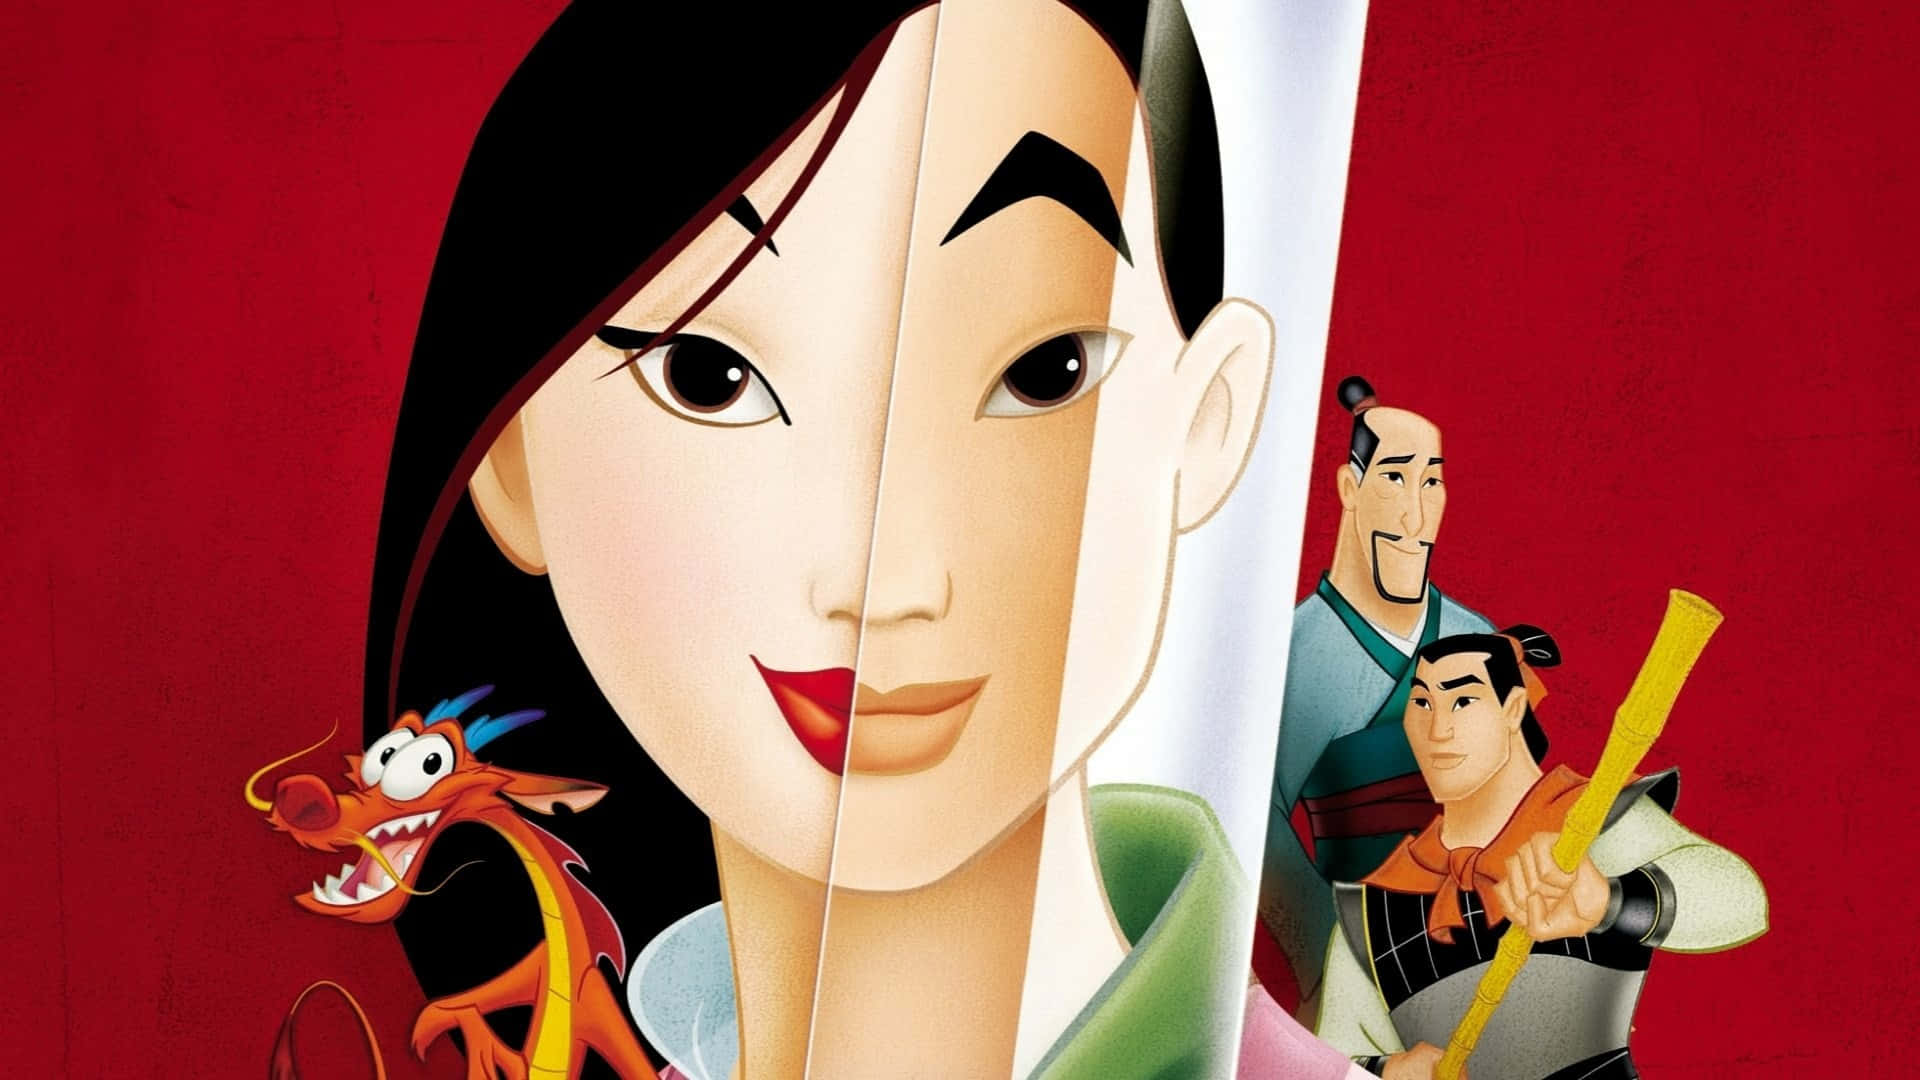 Mulan uses her courage and determination to fight for the honor of her family